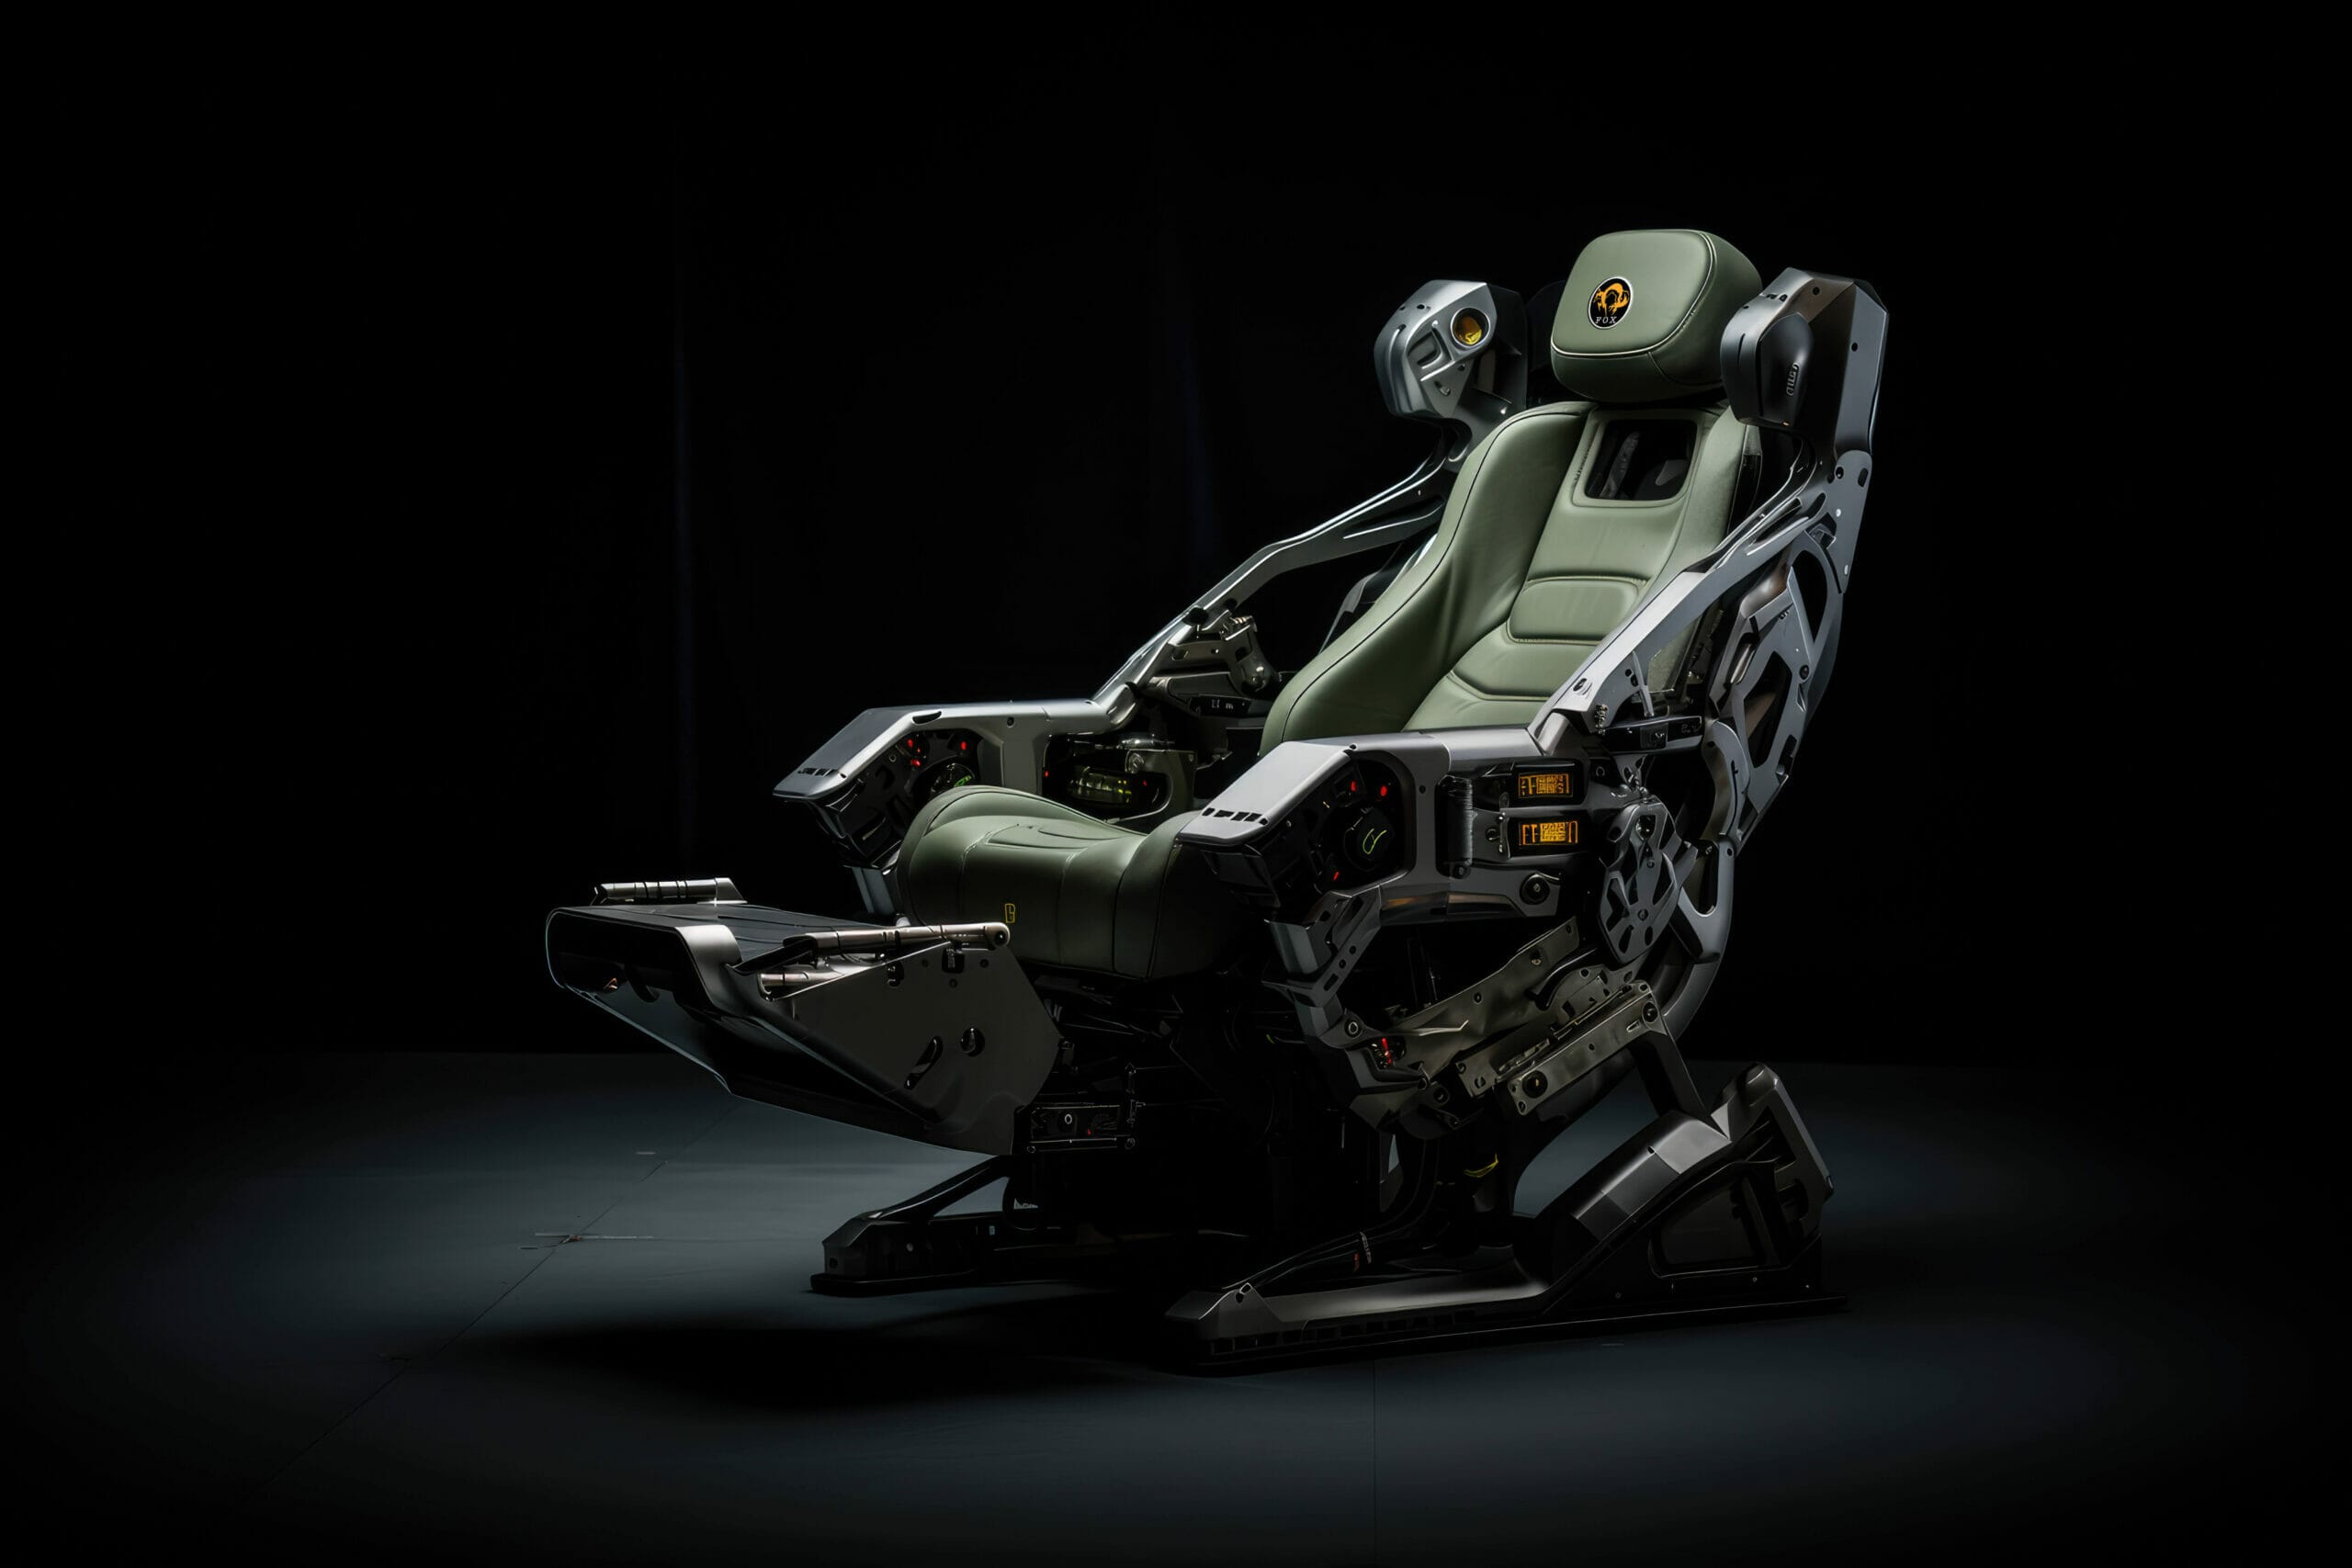 Metal Gear Solid inspired gaming chair